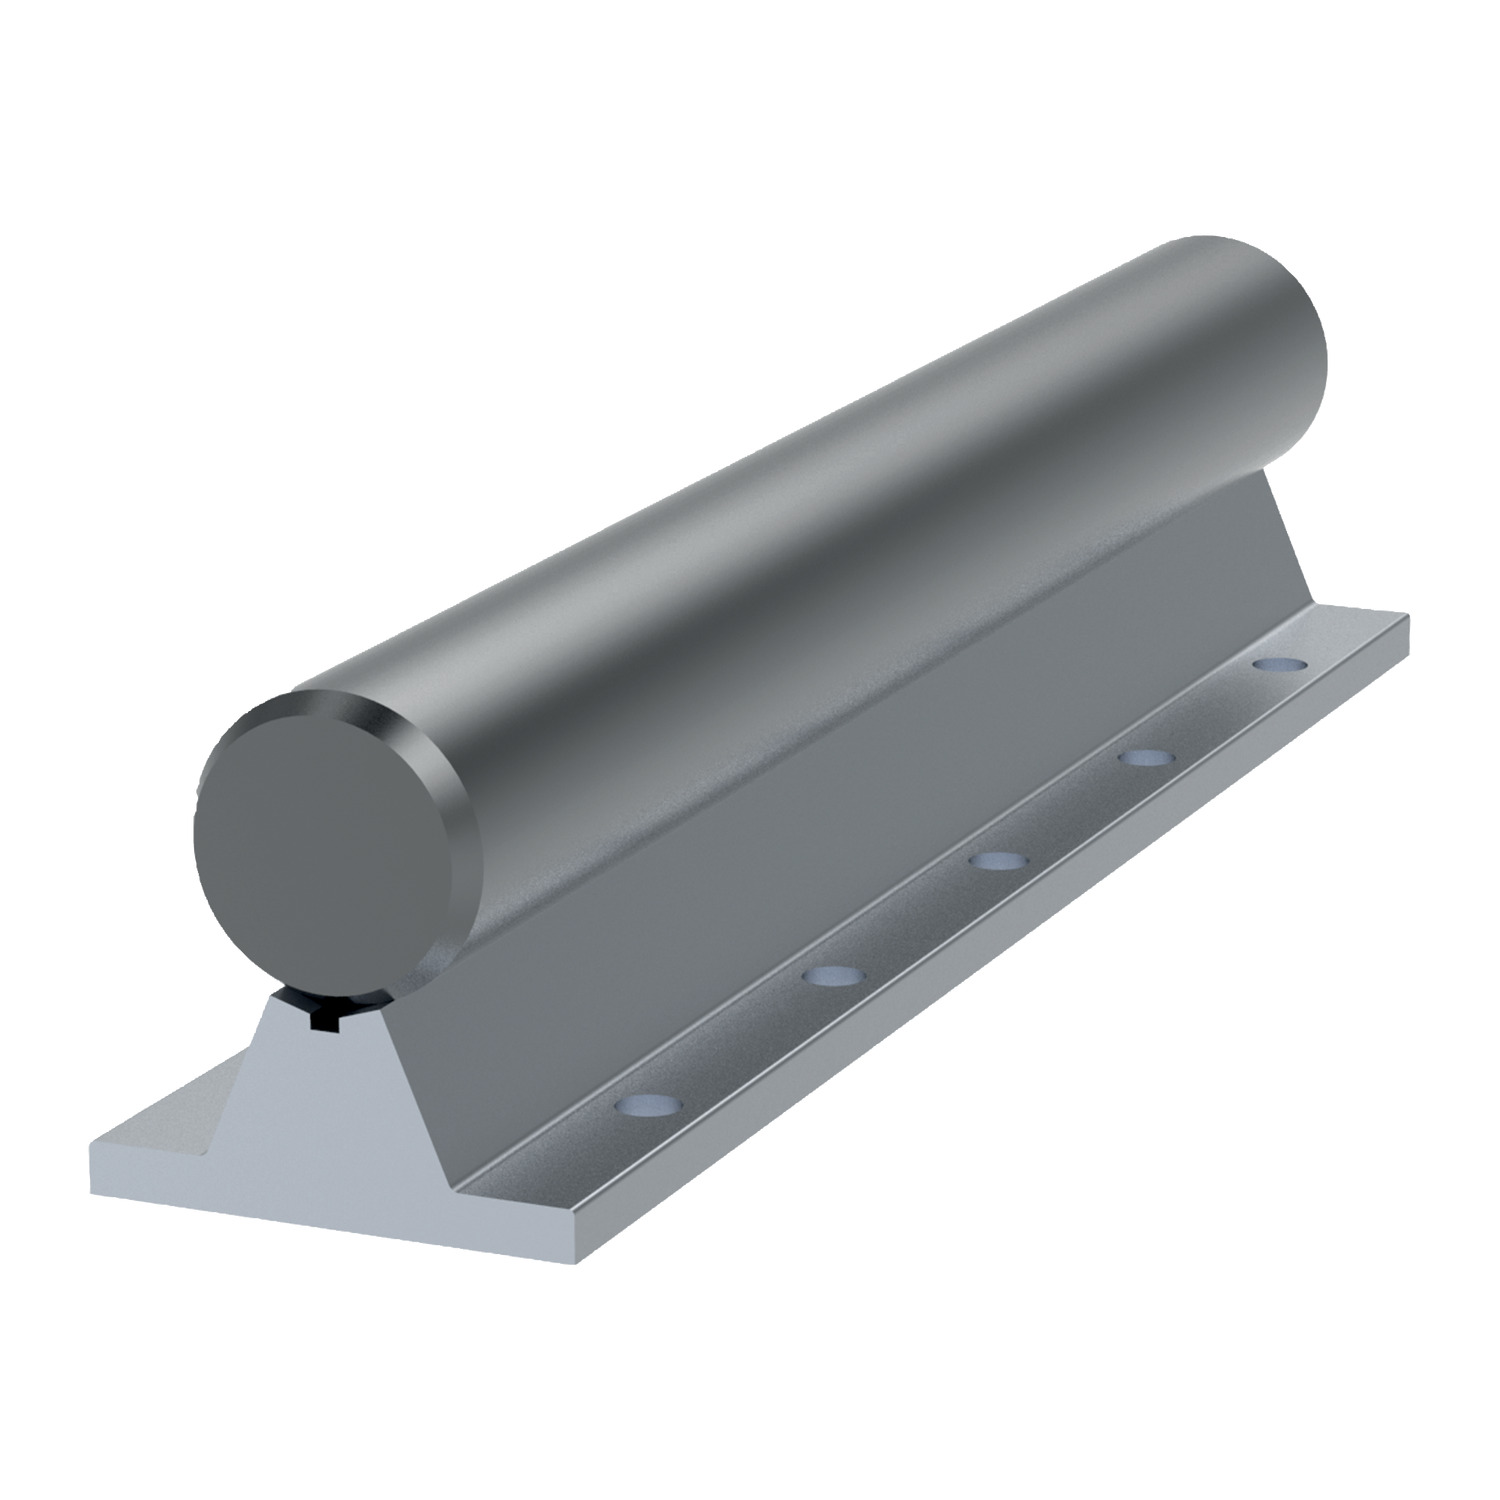 Shaft Support Rails Hardened steel shafting or corrosion resistant linear shaft rods mounted on aluminium alloy support rails, for use with open flanged or unflanged carriages